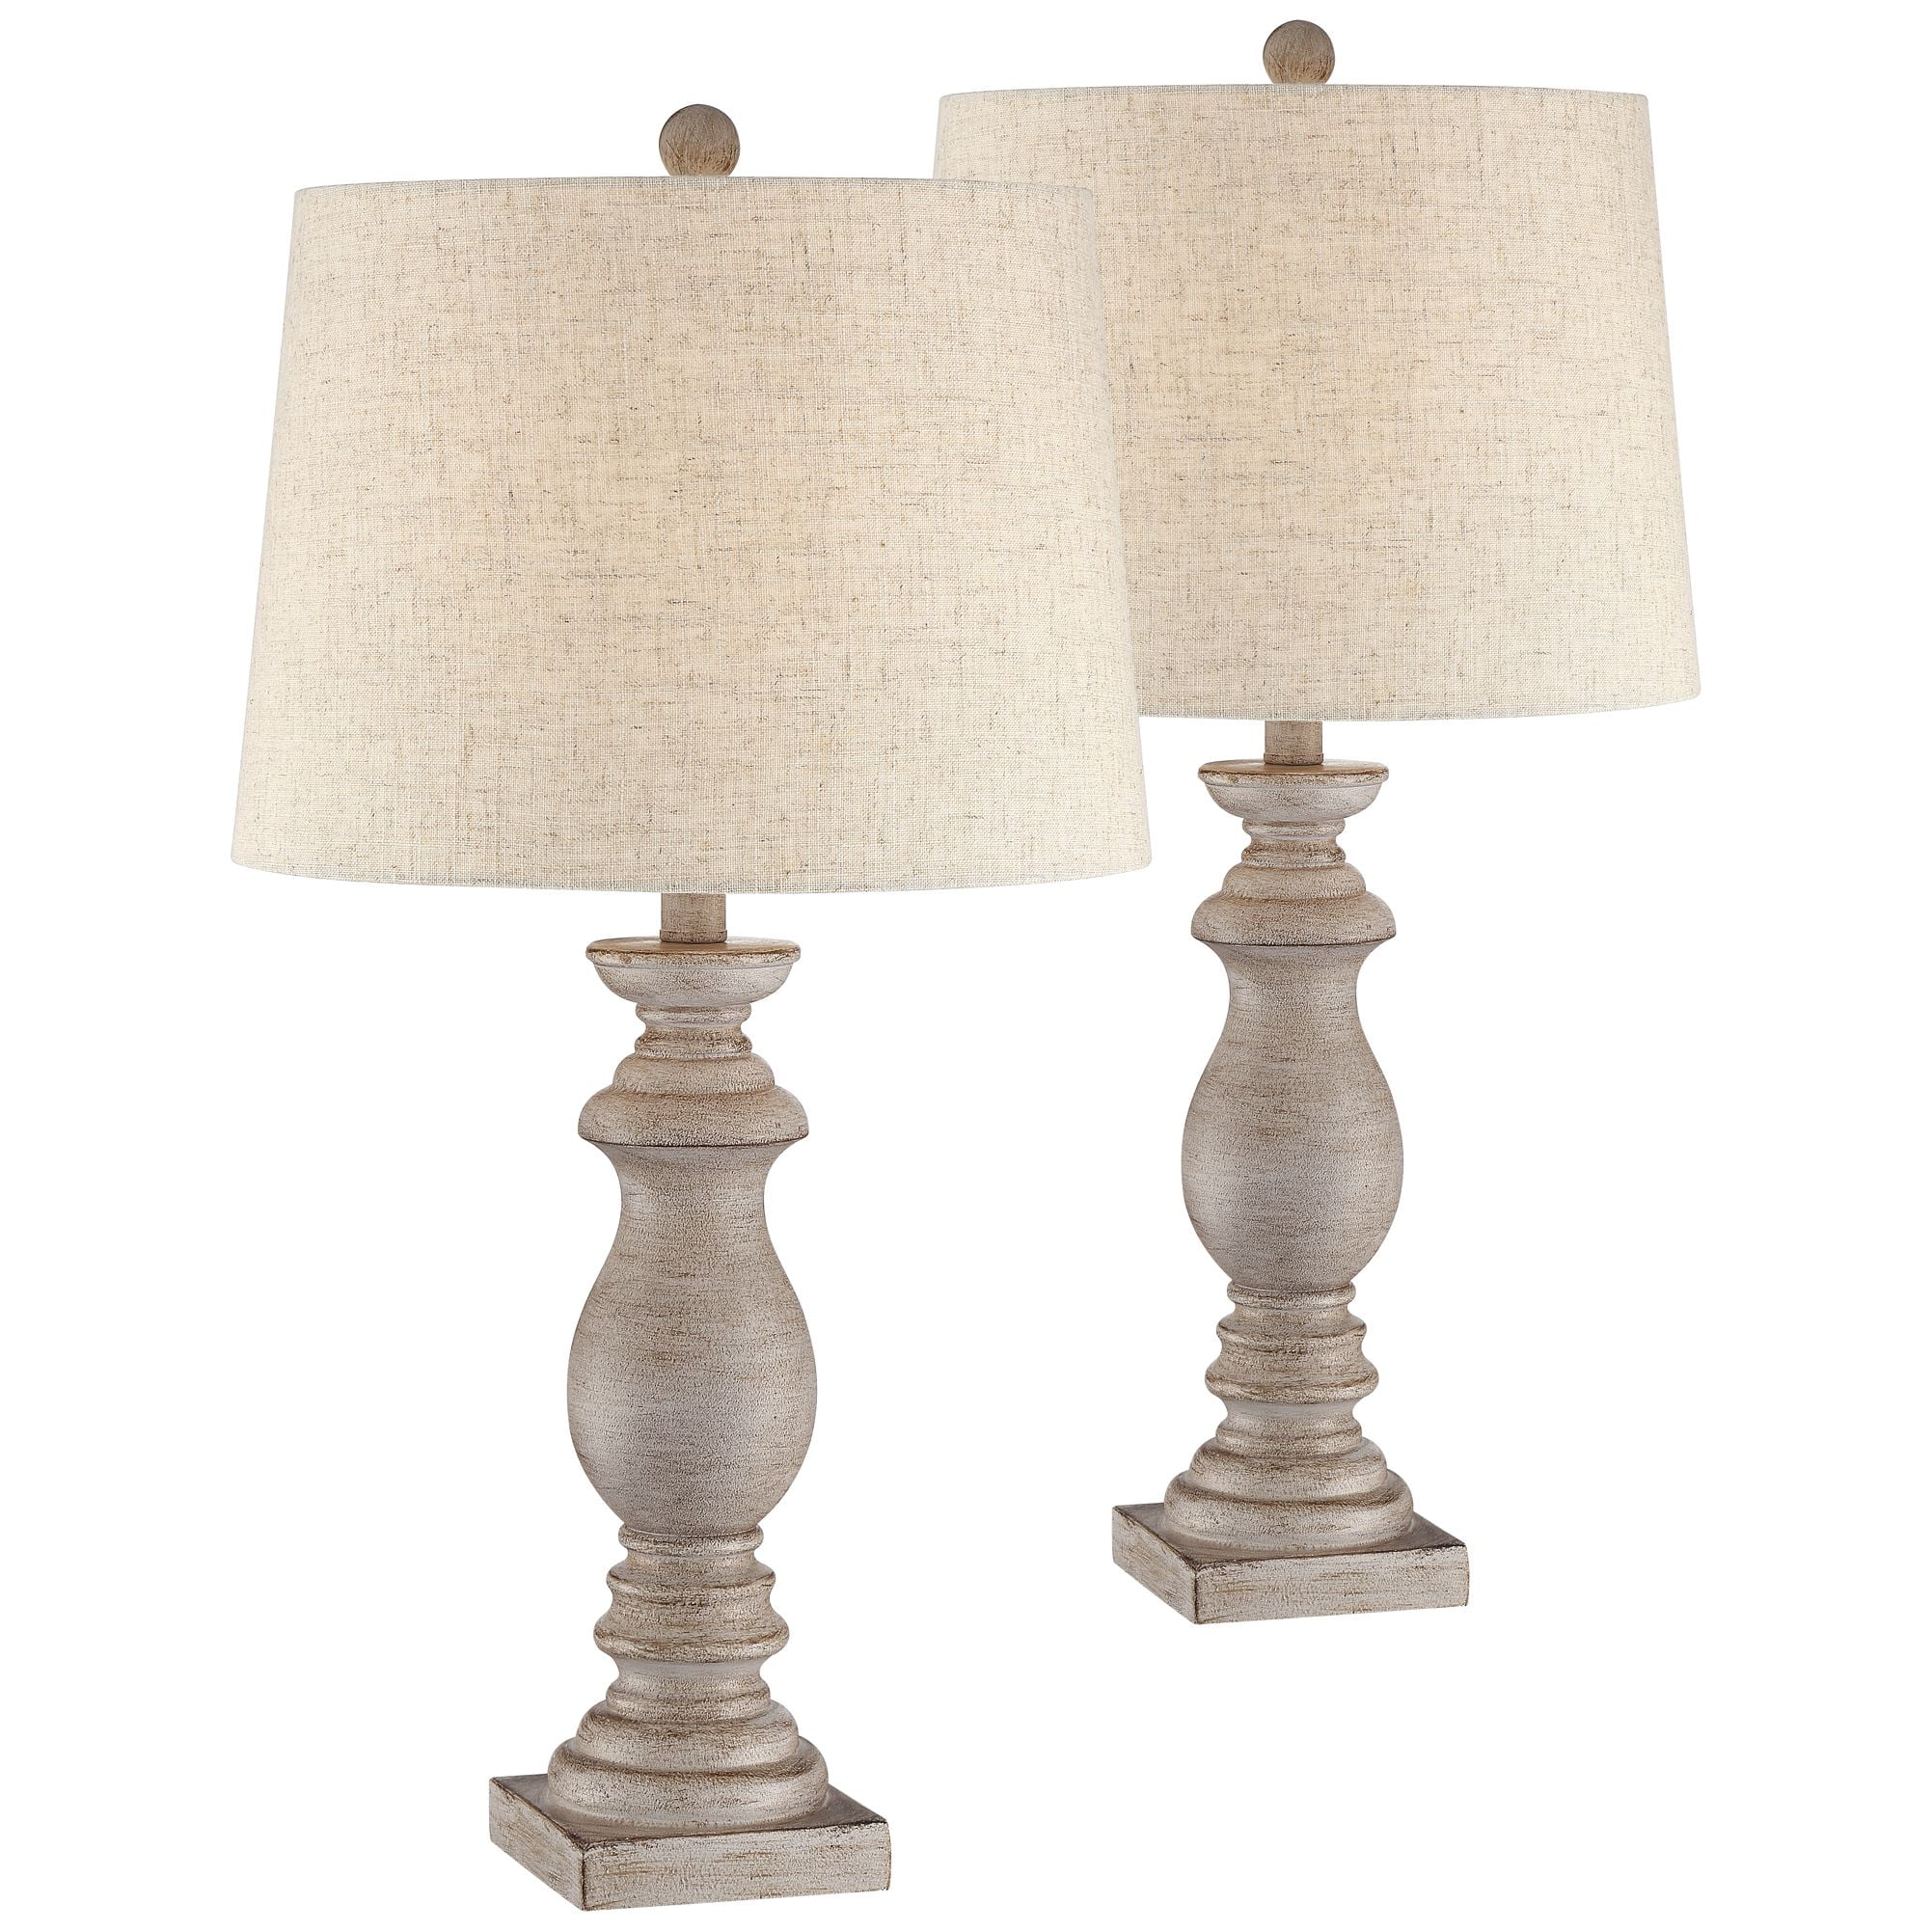 Regency Hill Traditional Table Lamps, Table Lamps For Living Room Ideas